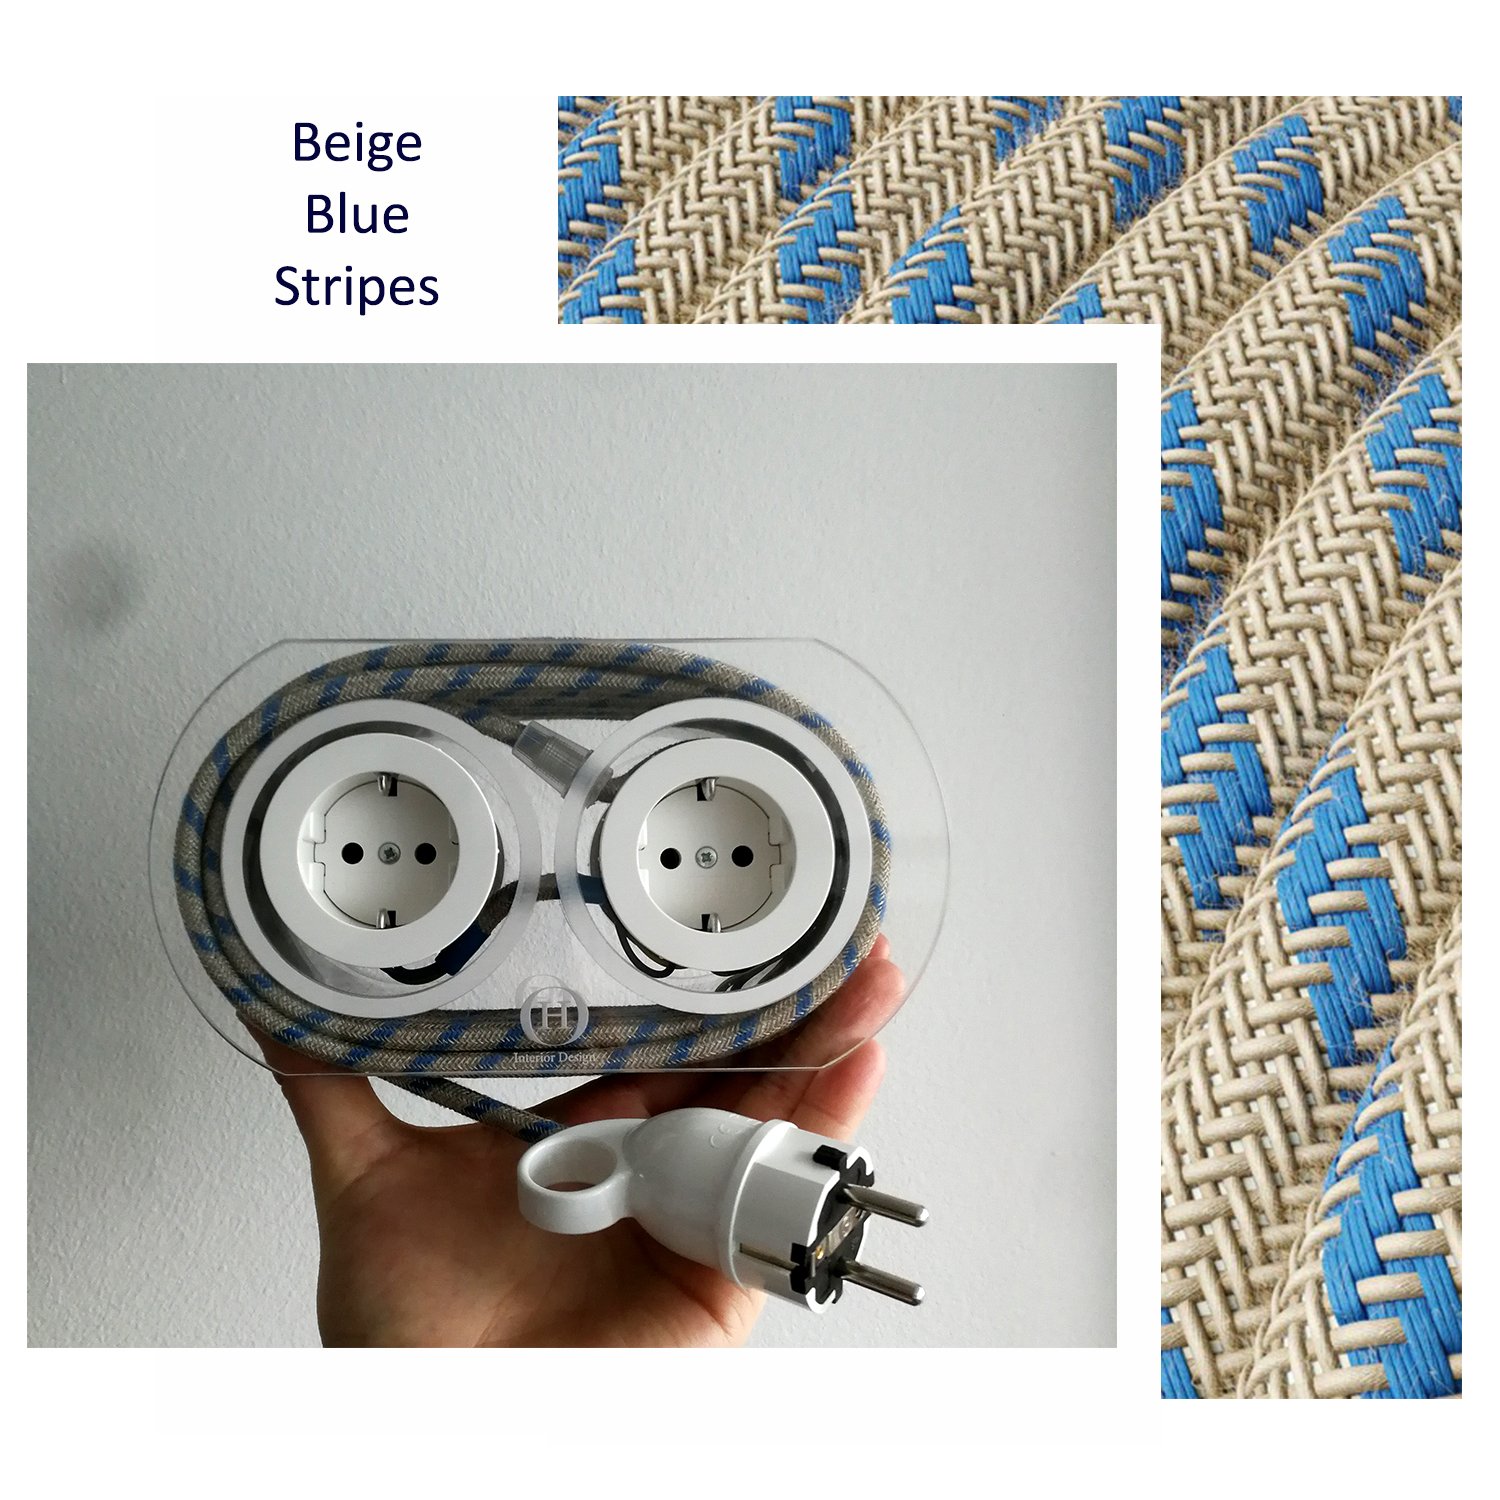 Extension Cord for 4 Plugs_stripes, blue natural cotton cord.jpg